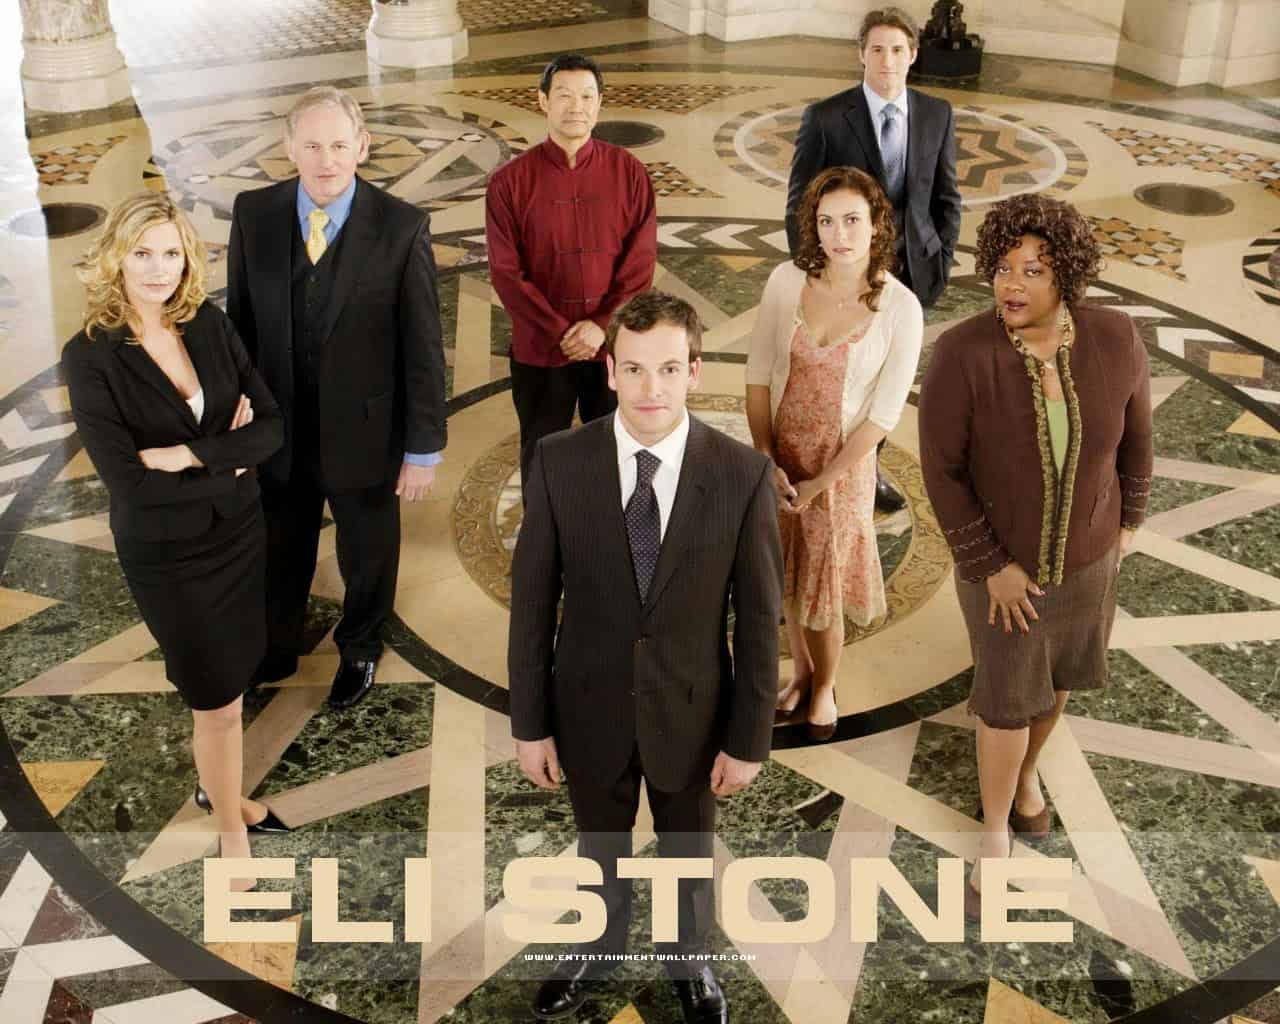 why was Eli Stone cancelled